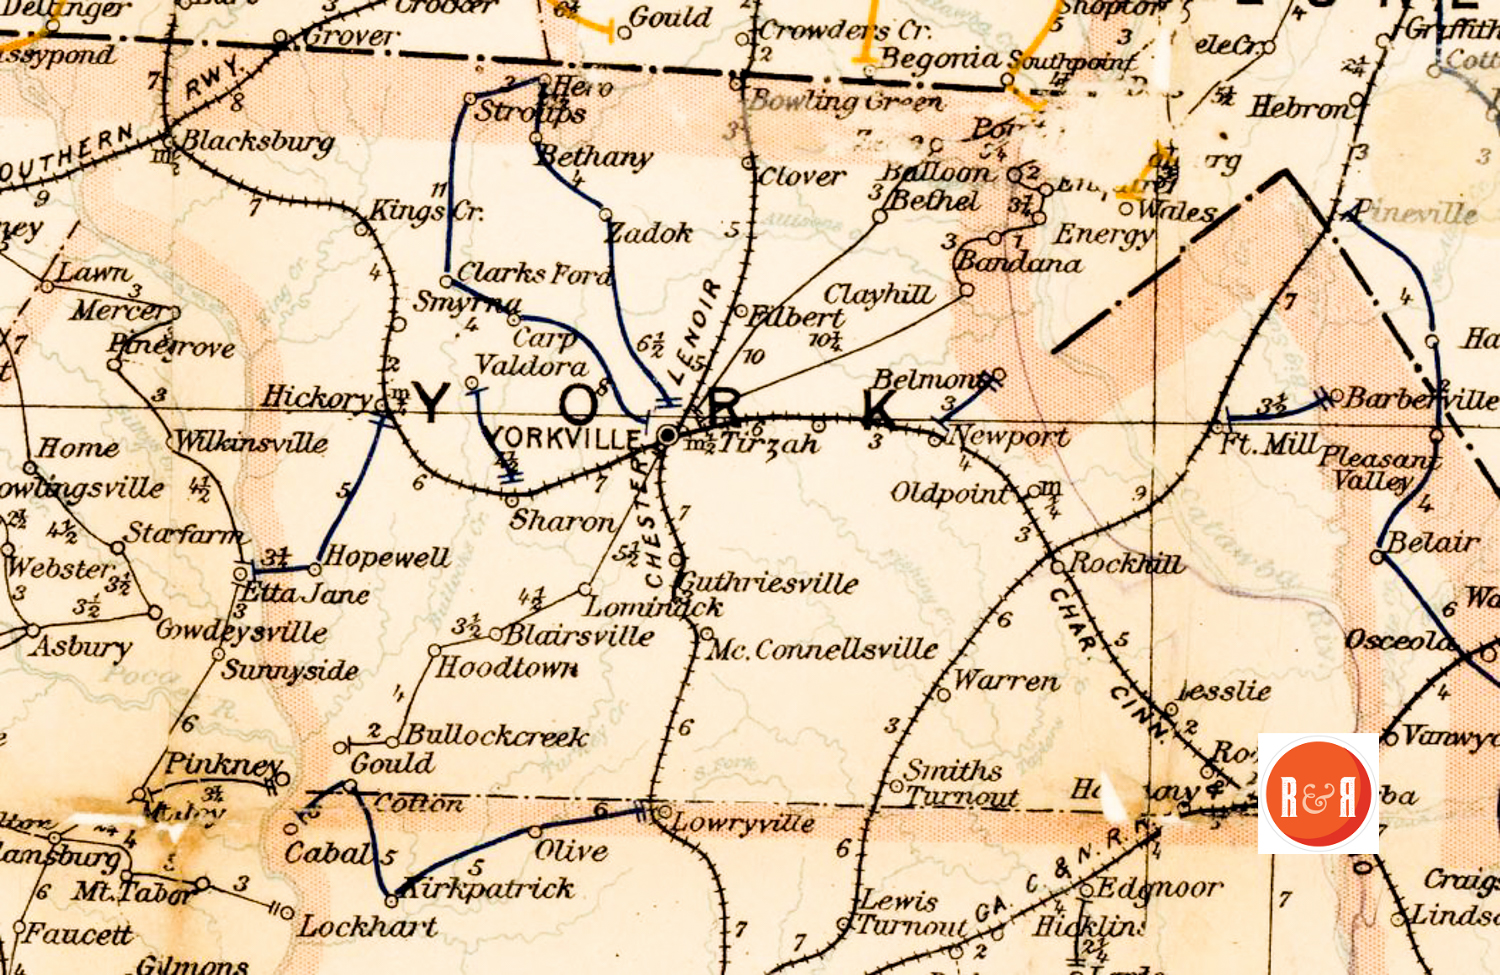 POSTAL MAP OF WESTERN YORK COUNTY, S.C.